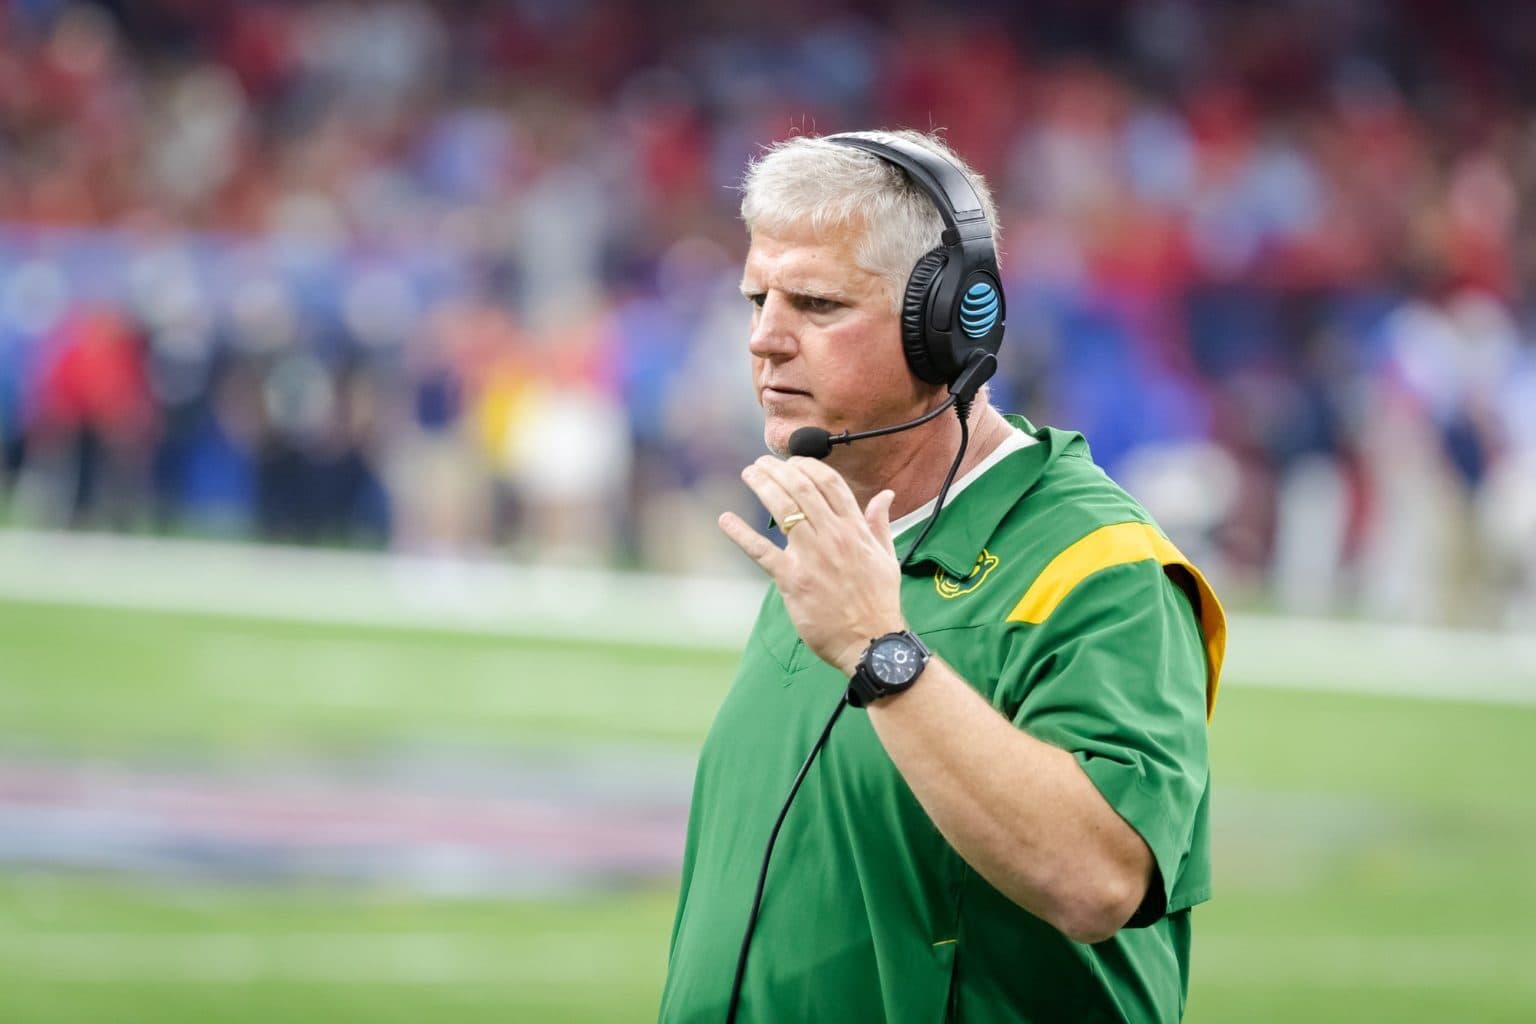 Baylor football defensive coordinator Ron Roberts on the sideline during the 2022 Allstate Sugar Bowl against the University of Mississippi on Jan. 1, 2022 Josh Wilson | Roundup